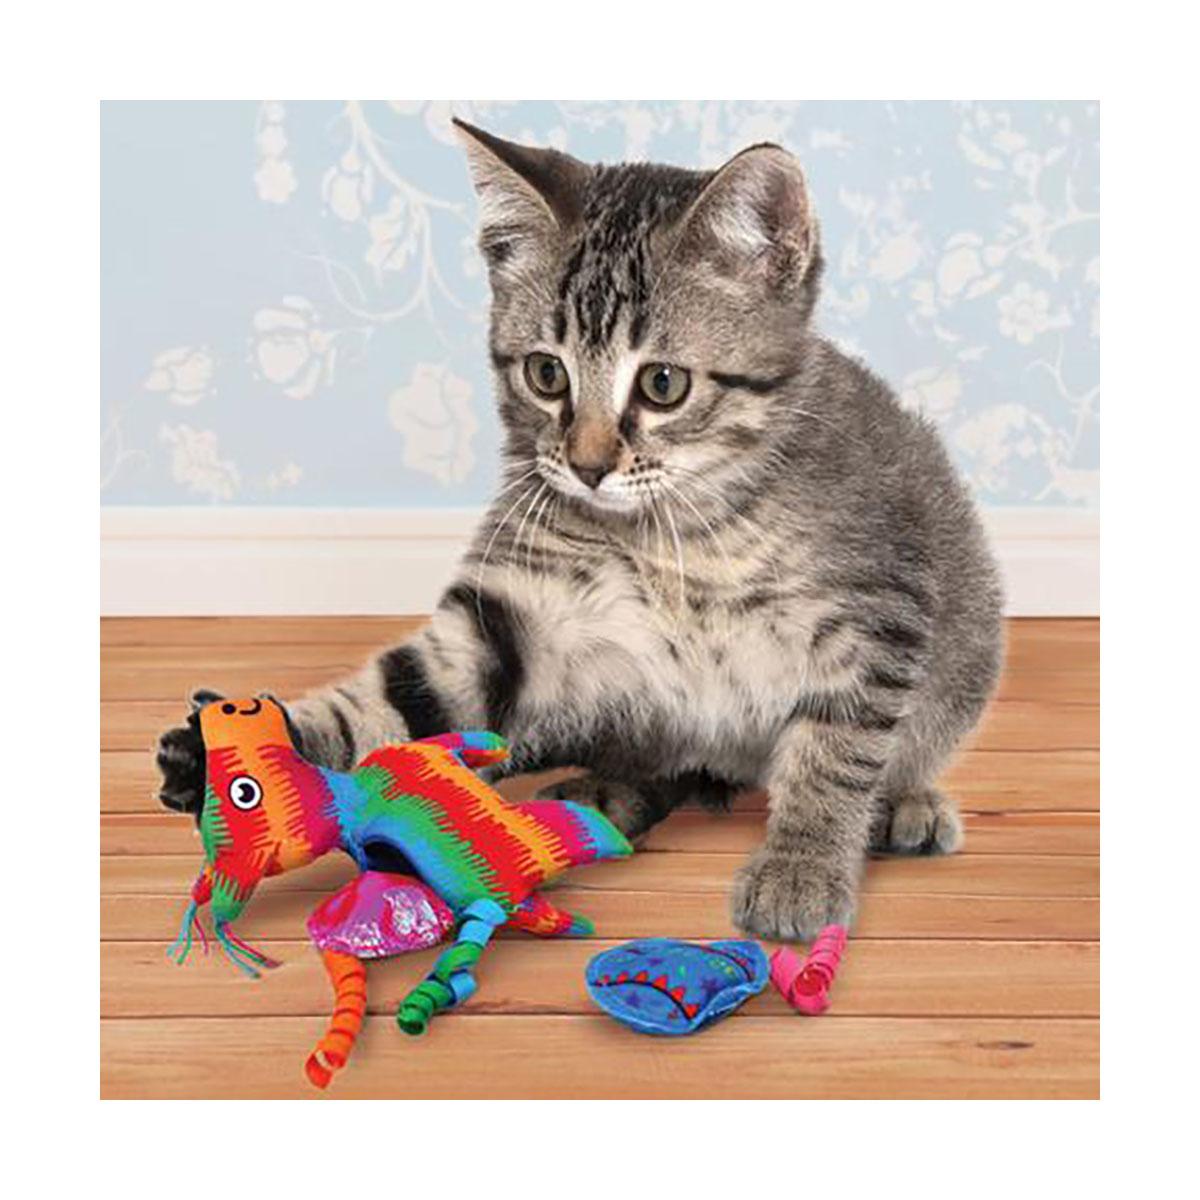 https://images.baxterboo.com/global/images/products/large/kong-pull-a-partz-pinata-cat-toy-7059.jpg